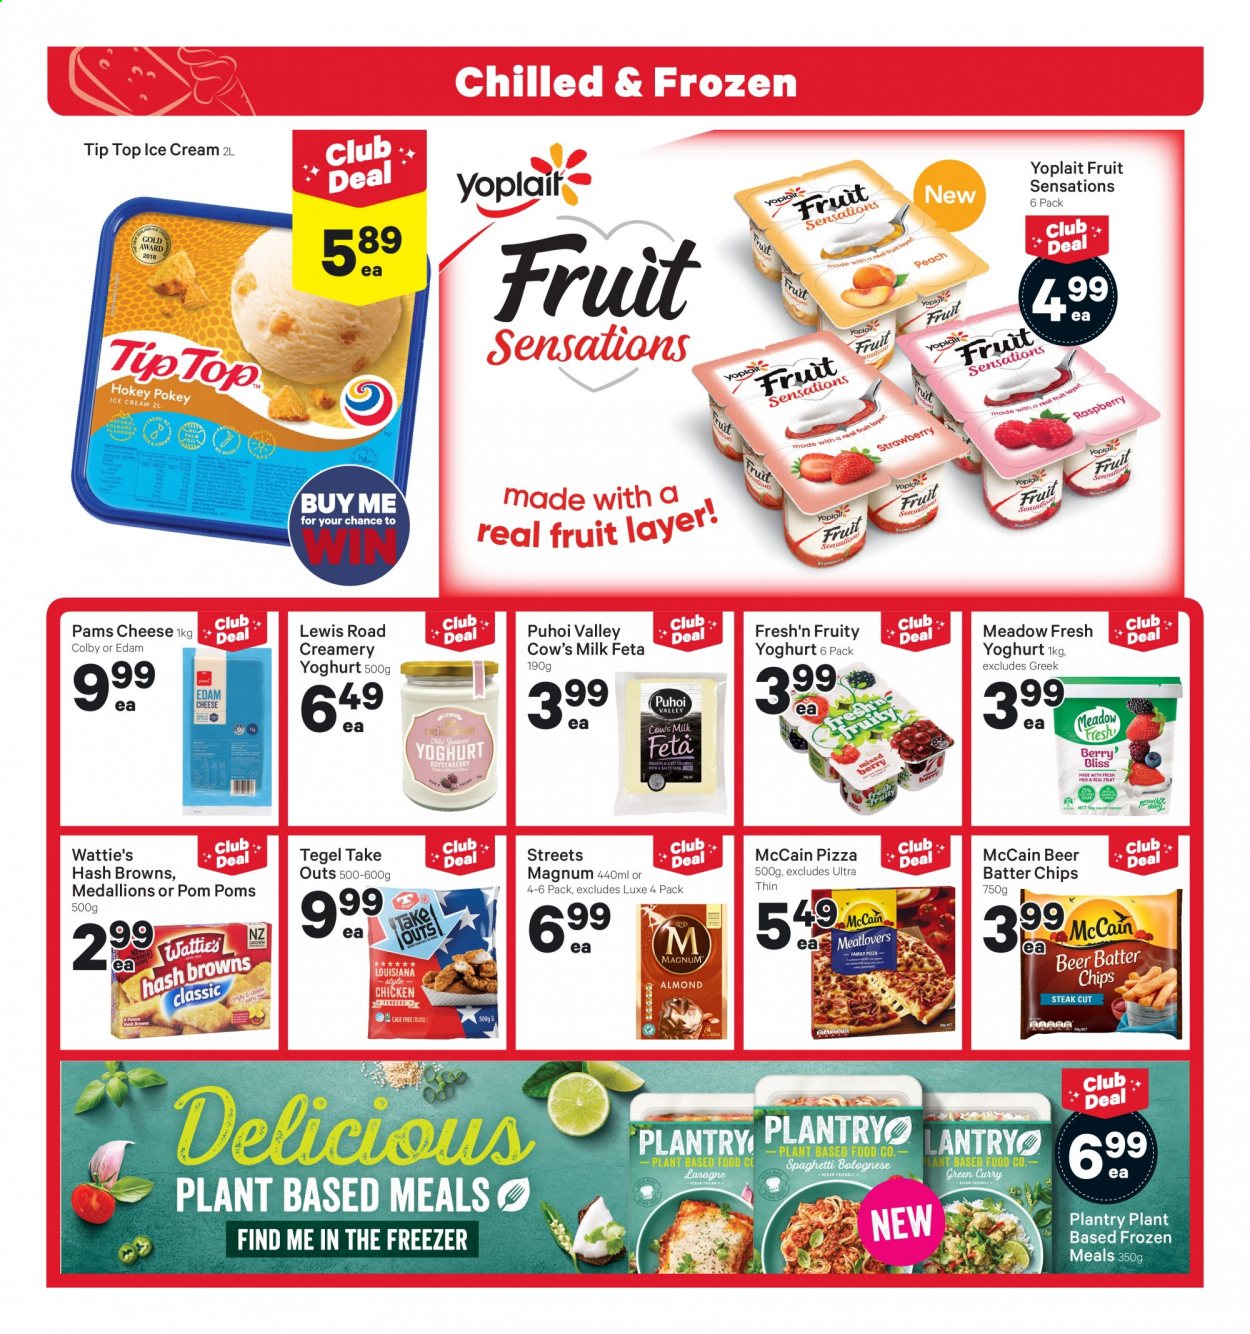 thumbnail - New World mailer - 01.03.2021 - 07.03.2021 - Sales products - hash browns, pizza, Wattie's, Colby cheese, edam cheese, cheese, feta, yoghurt, Fresh'n Fruity, Yoplait, milk, cage free eggs, Magnum, ice cream, family pizza, McCain, lasagne sheets, spaghetti, almonds, beer, steak. Page 15.